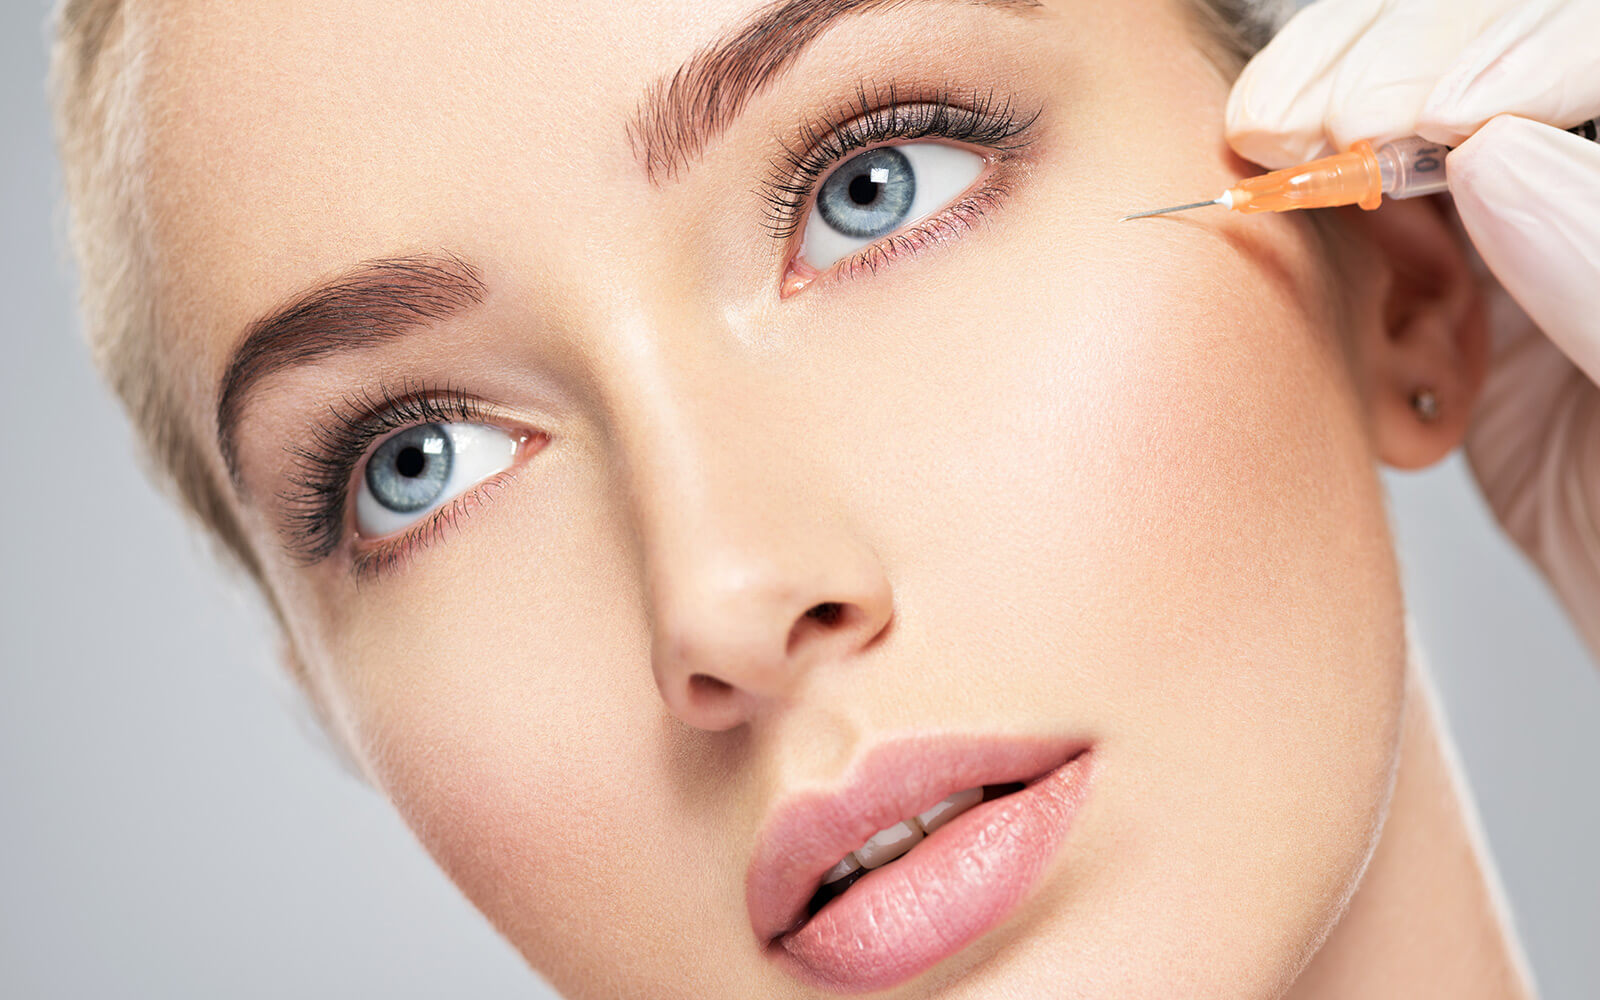 4 Facts About Preventative Botox